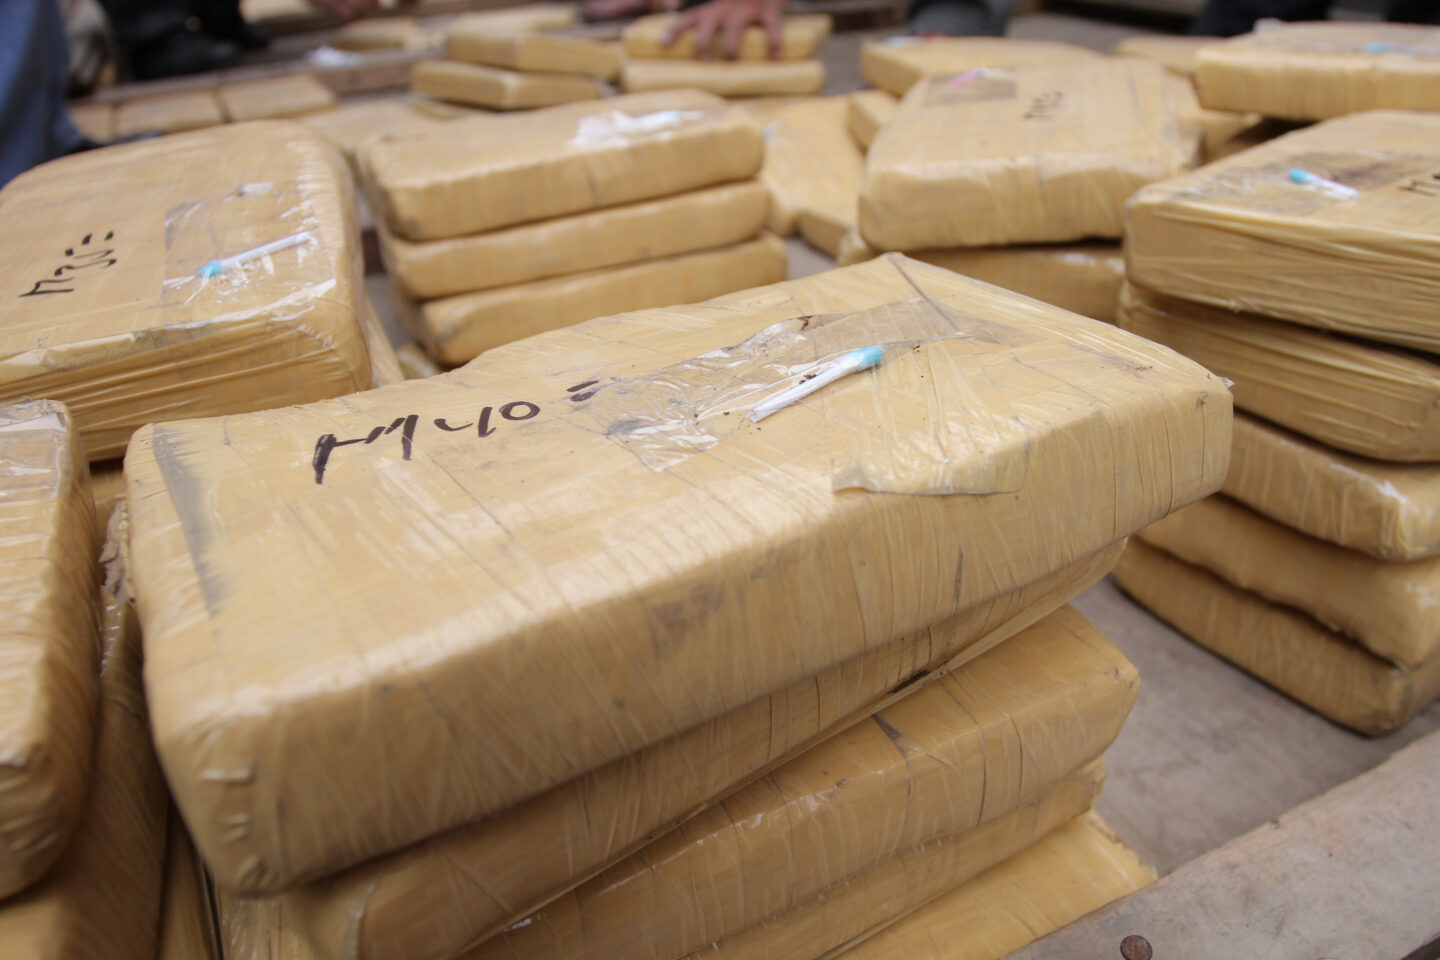 Sweden Authorities Seize 1.4 Tons of Cocaine, ‘One of the Biggest’ Seizures Ever